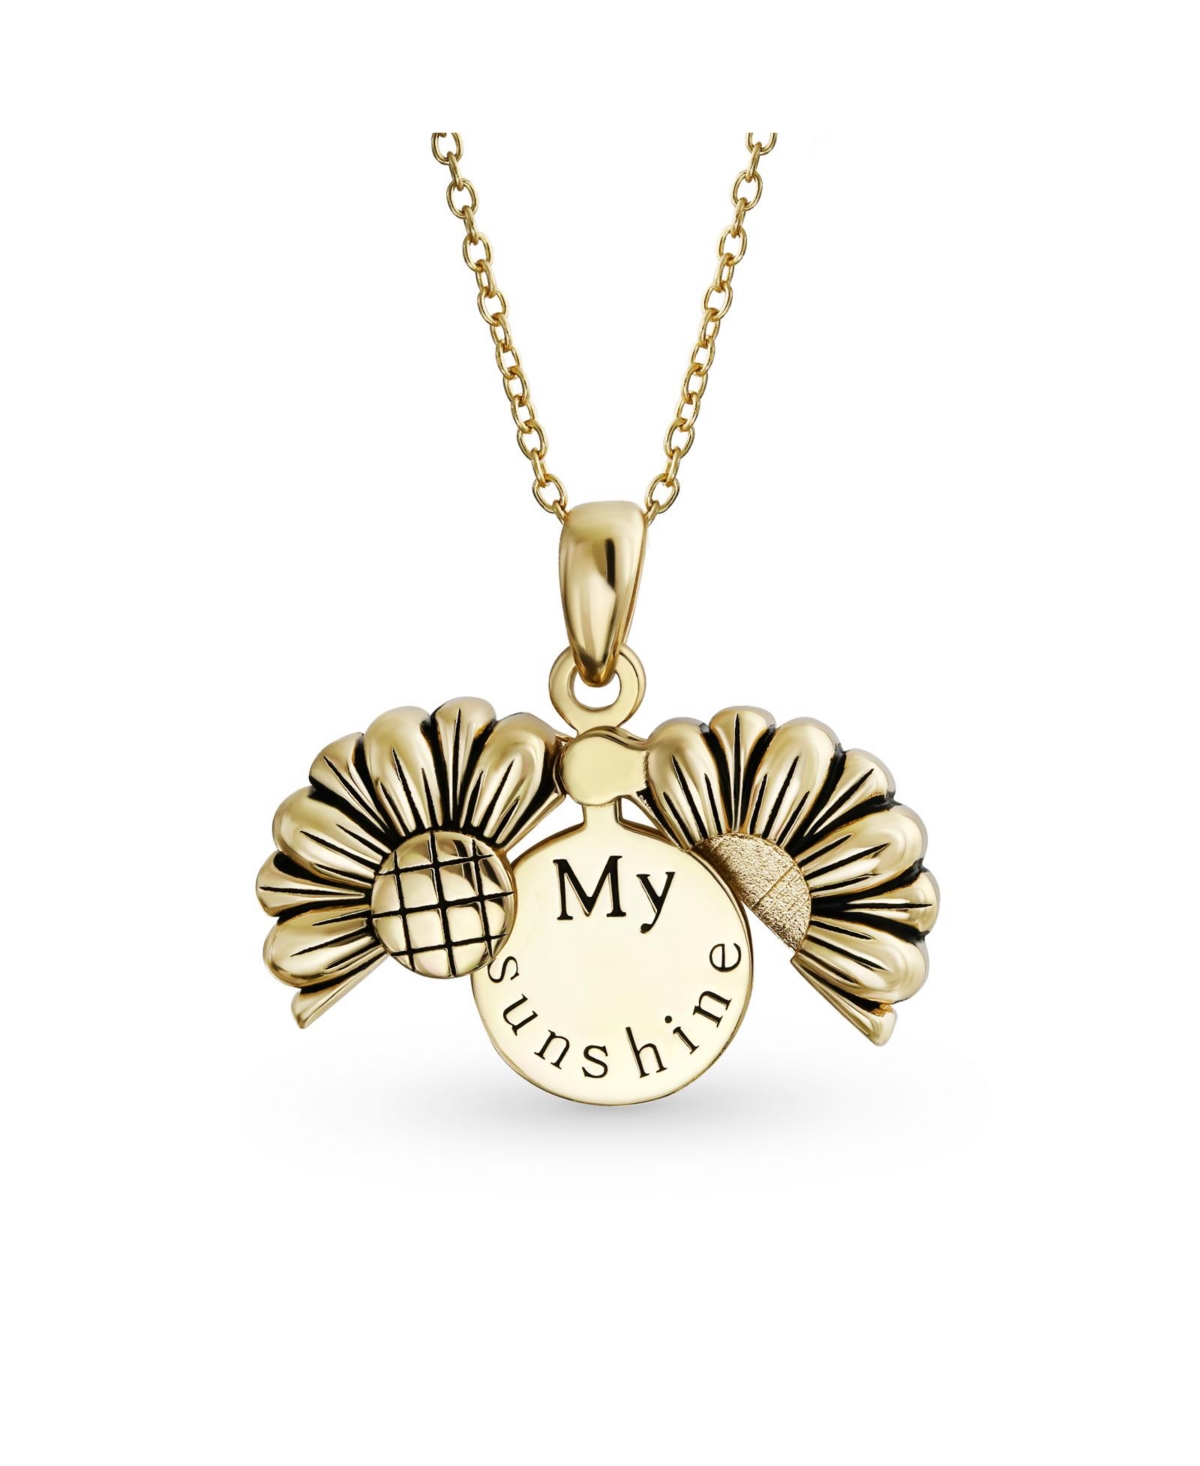 Personalize Floral Flower Inspirational Saying My Sunshine Words Sunflower Open Locket Pendant Necklace Girlfriend 14K Gold Plated Sterl